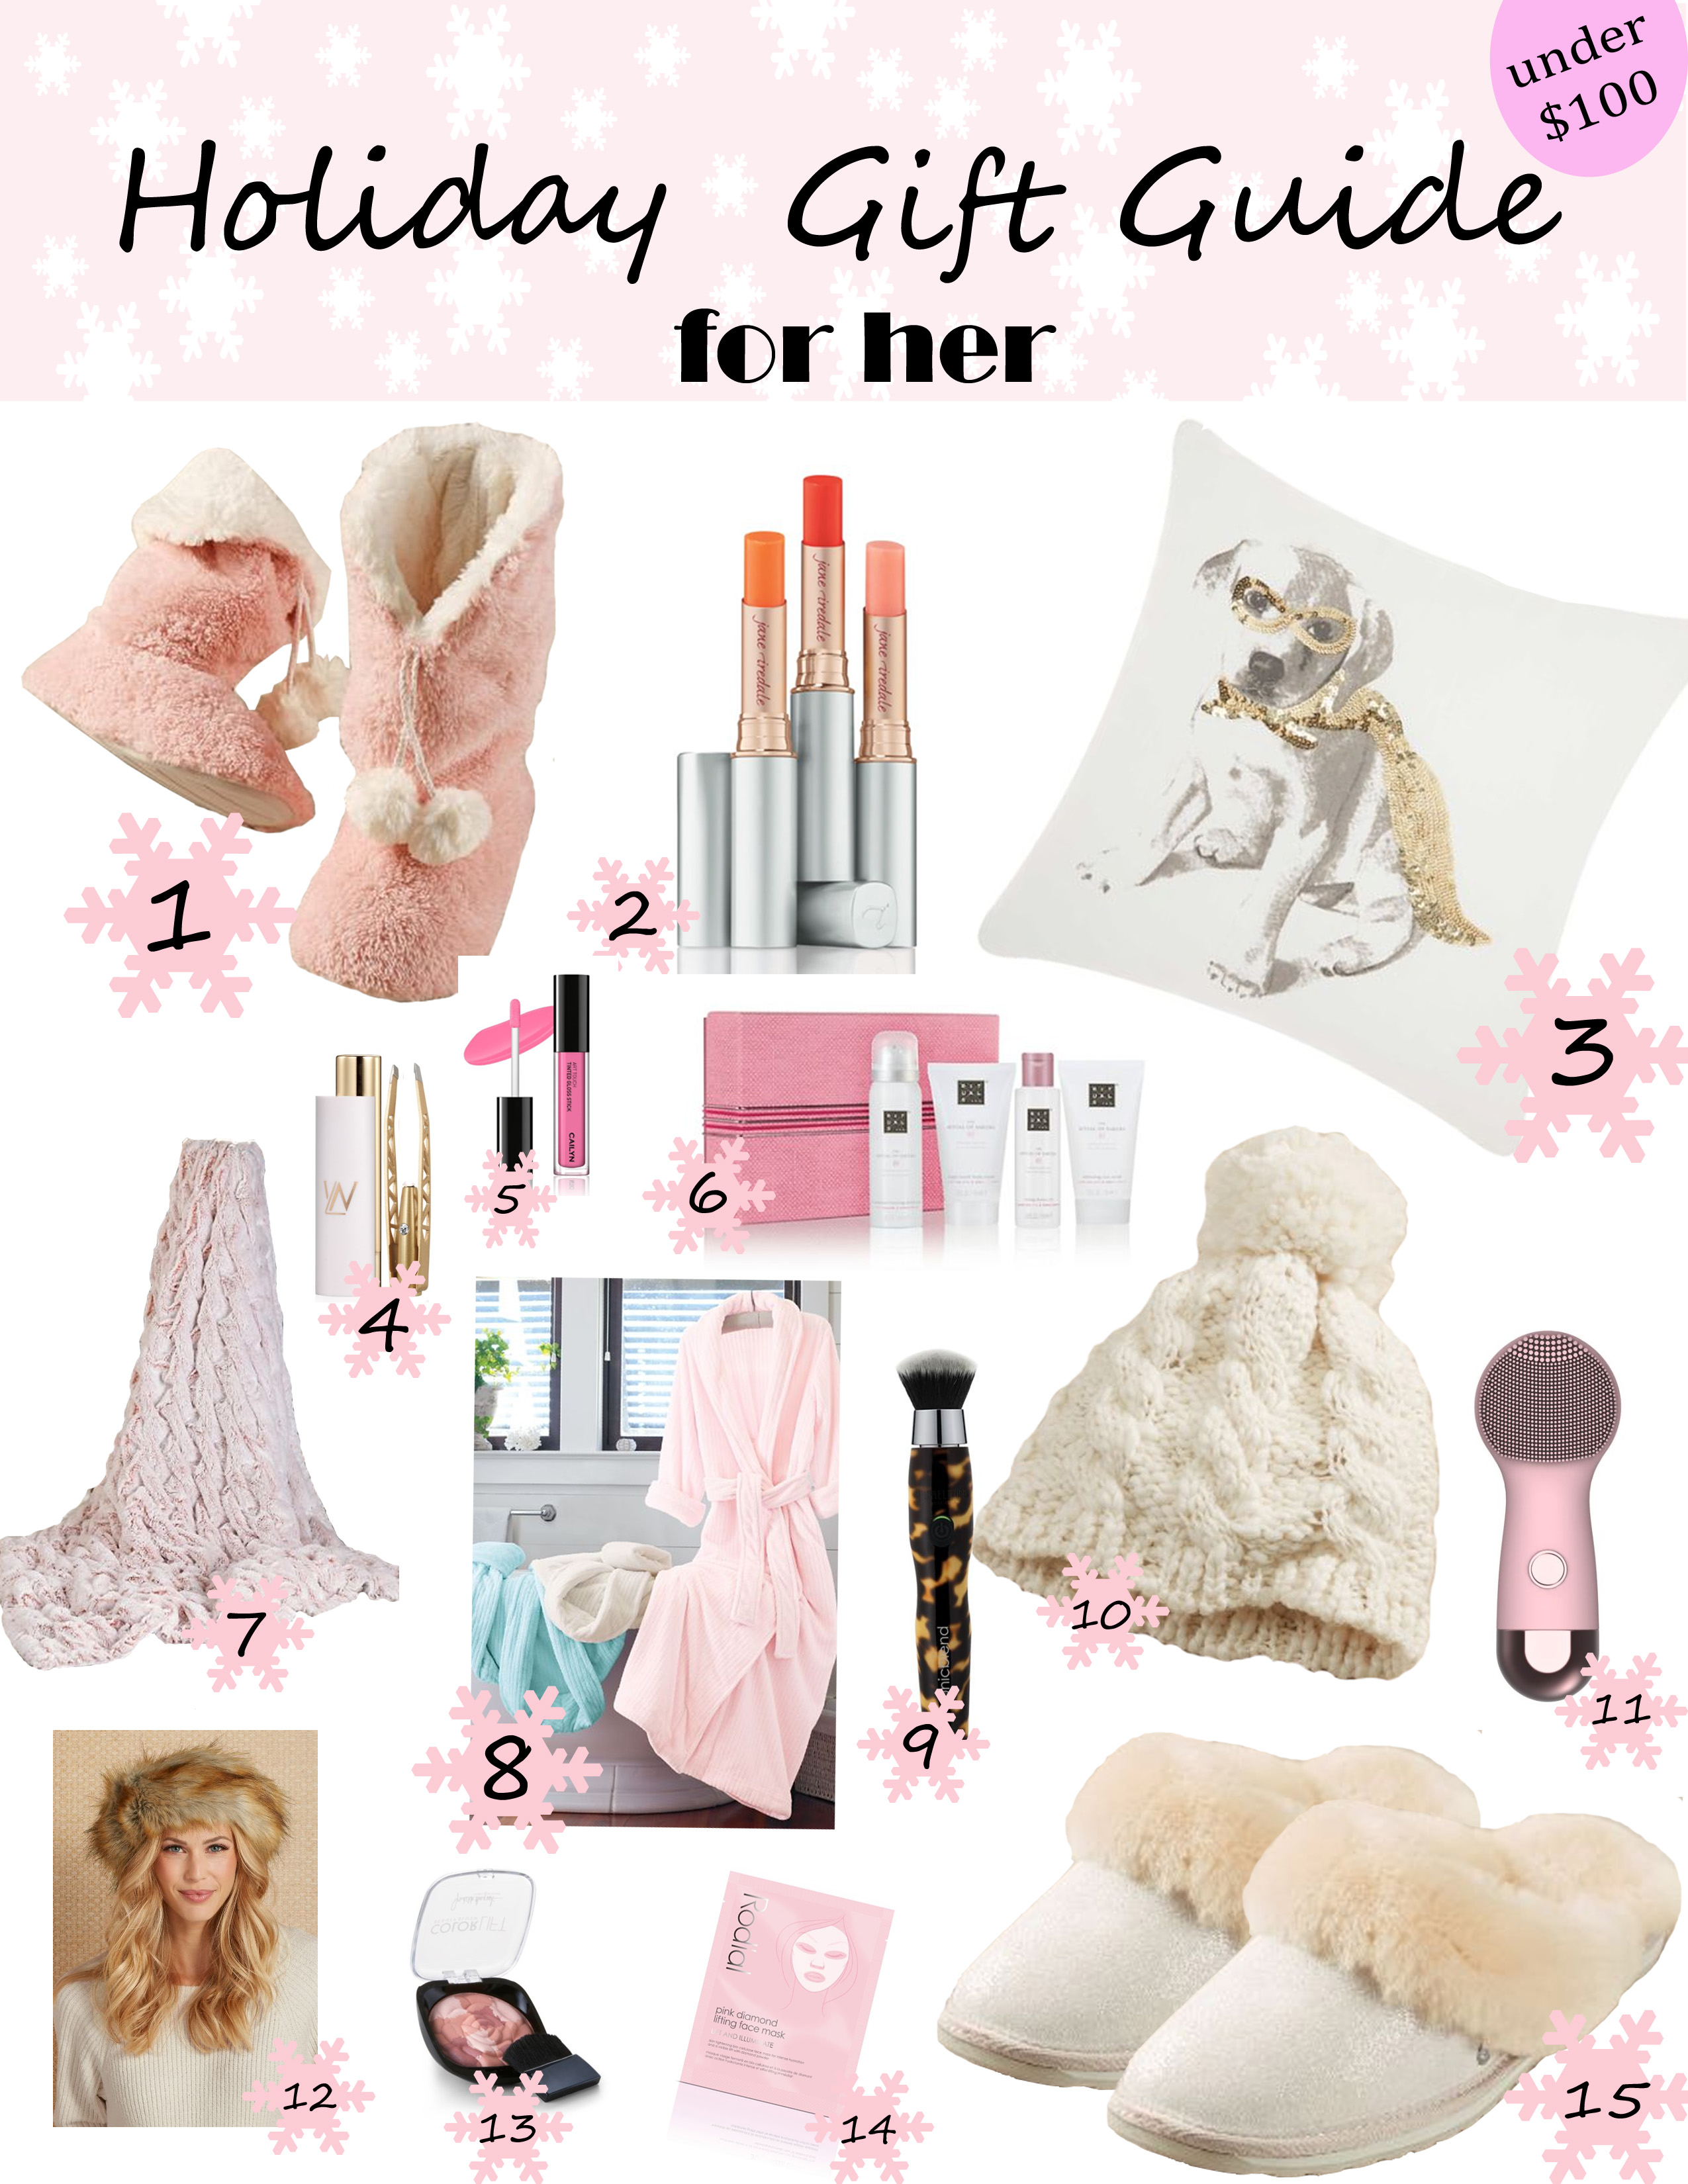 holiday gift guide for her, stocking stuffer for her, christmas gifts under $100